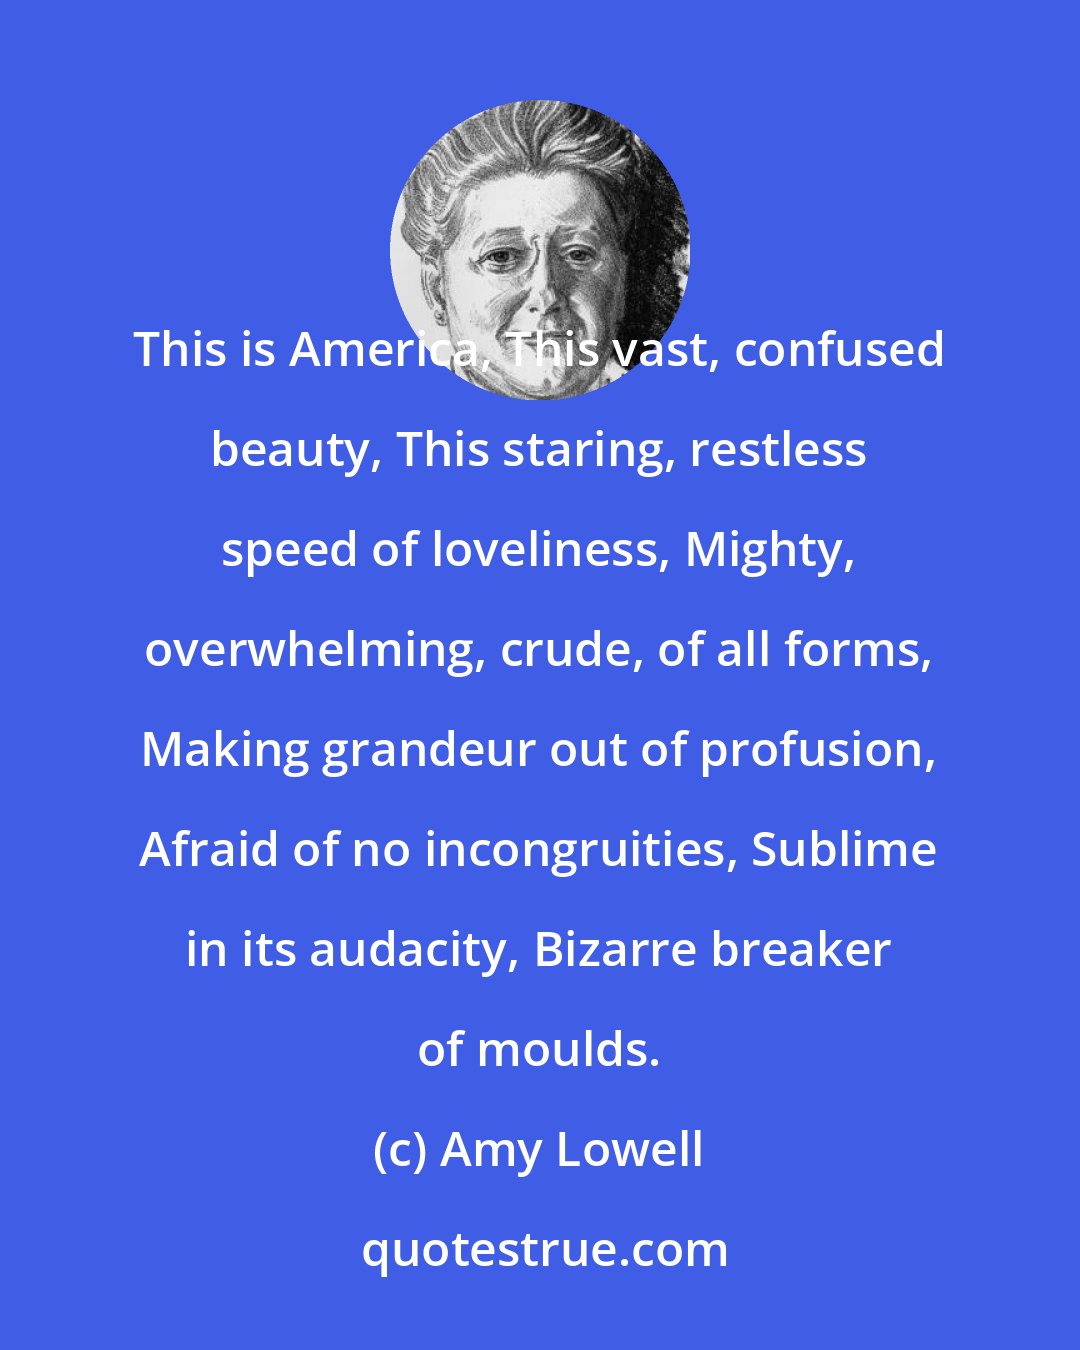 Amy Lowell: This is America, This vast, confused beauty, This staring, restless speed of loveliness, Mighty, overwhelming, crude, of all forms, Making grandeur out of profusion, Afraid of no incongruities, Sublime in its audacity, Bizarre breaker of moulds.